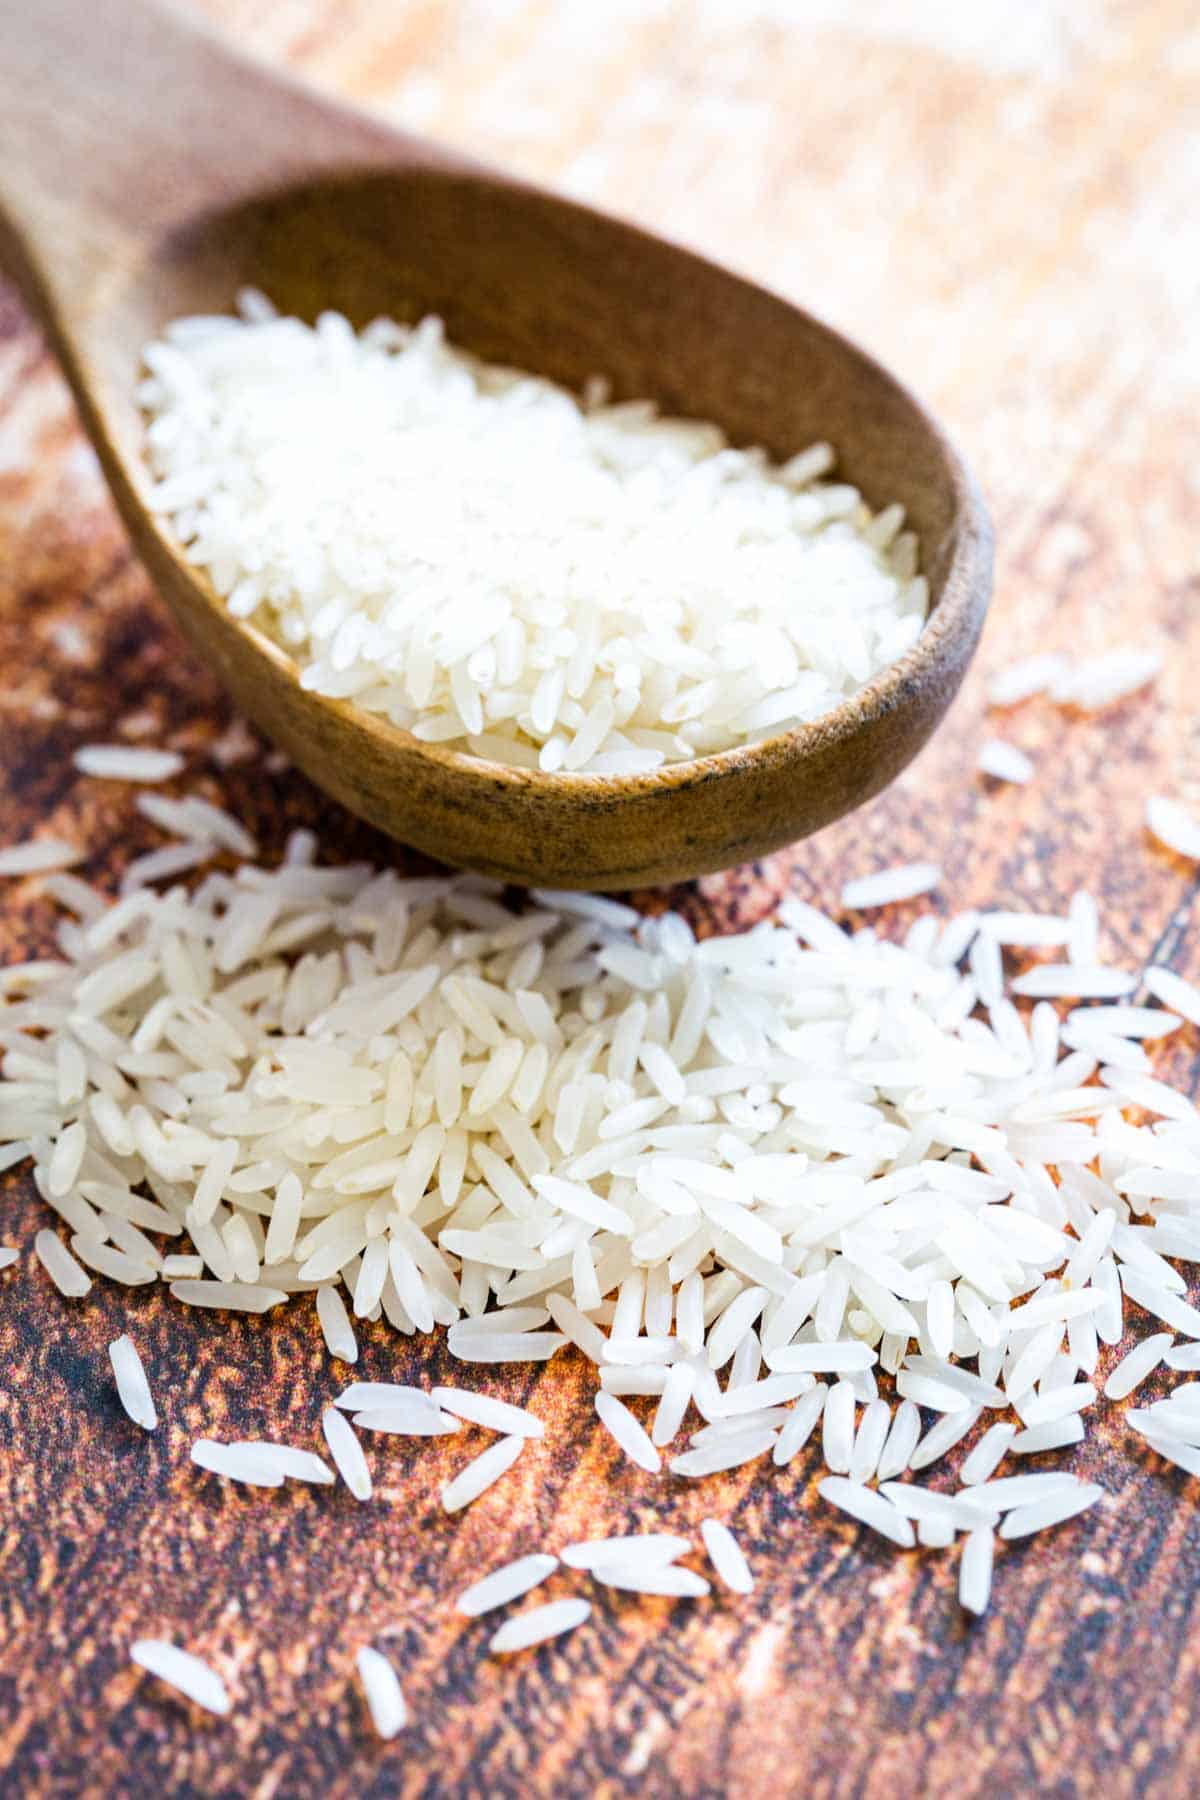 A large wooden spoonful of basmati rice resting on a wooden countertop next to scattered rice grains.